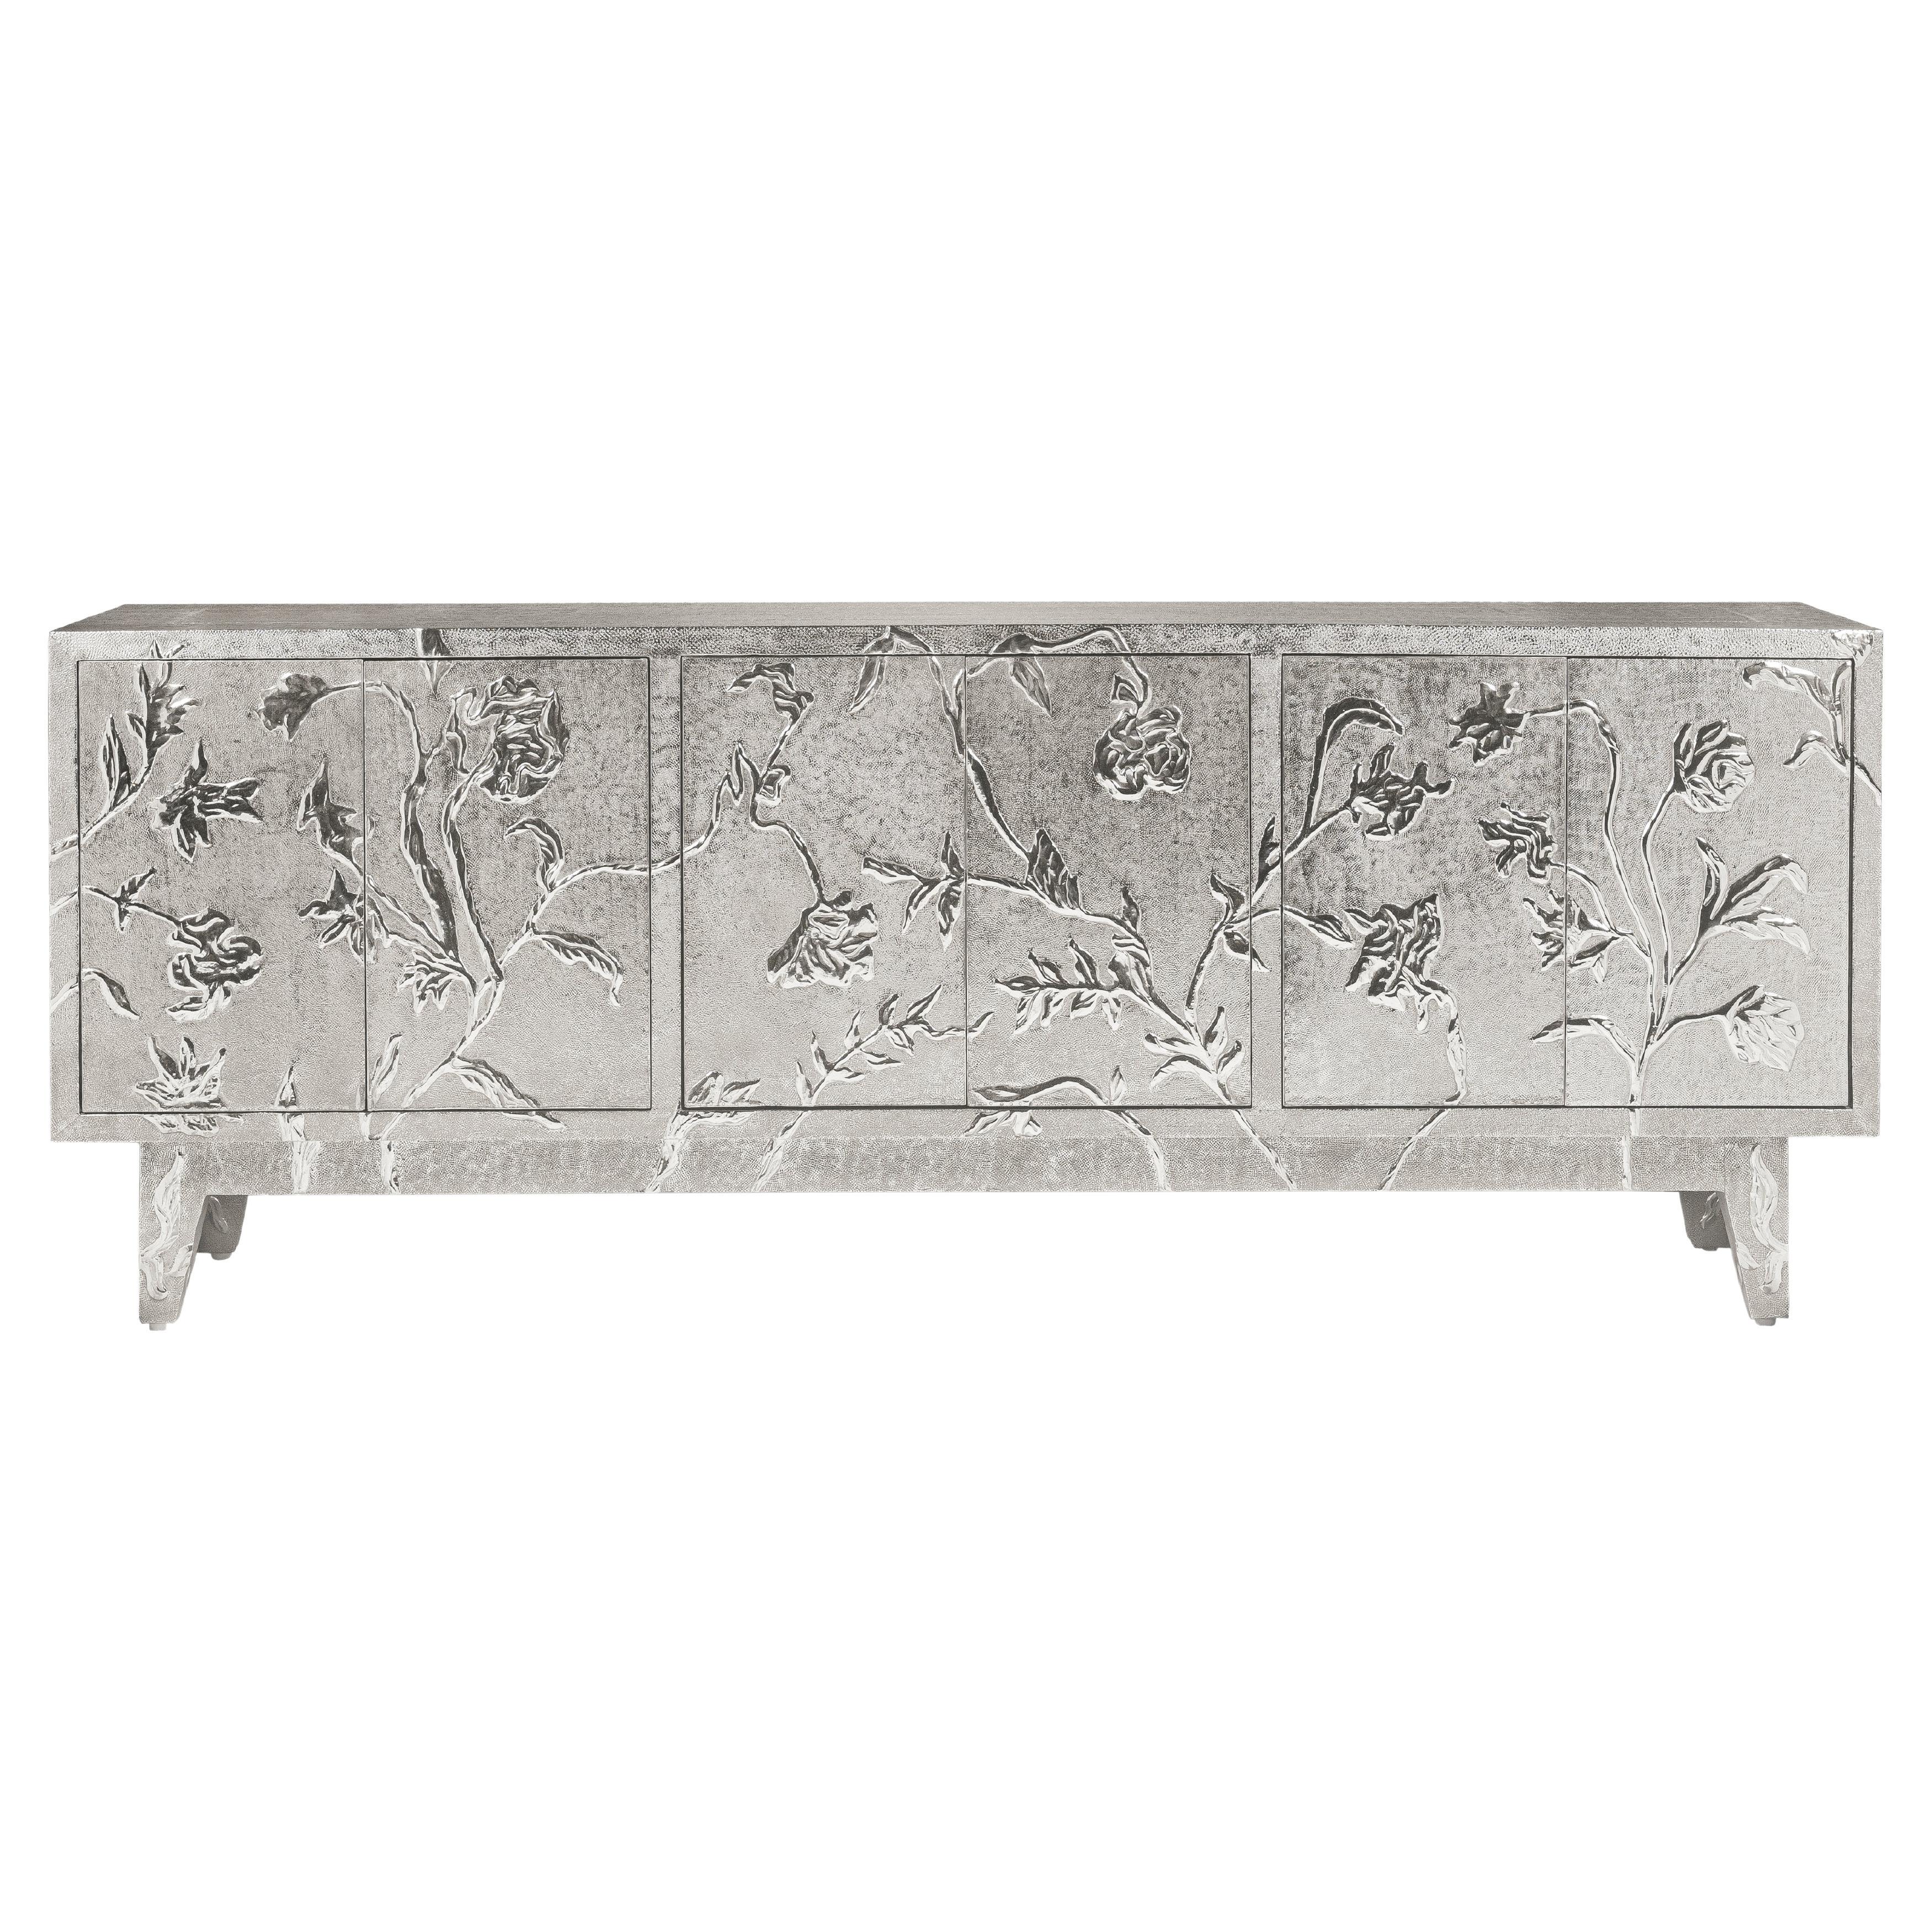 Floral Credenza in White Bronze Clad Over MDF Handcrafted In India